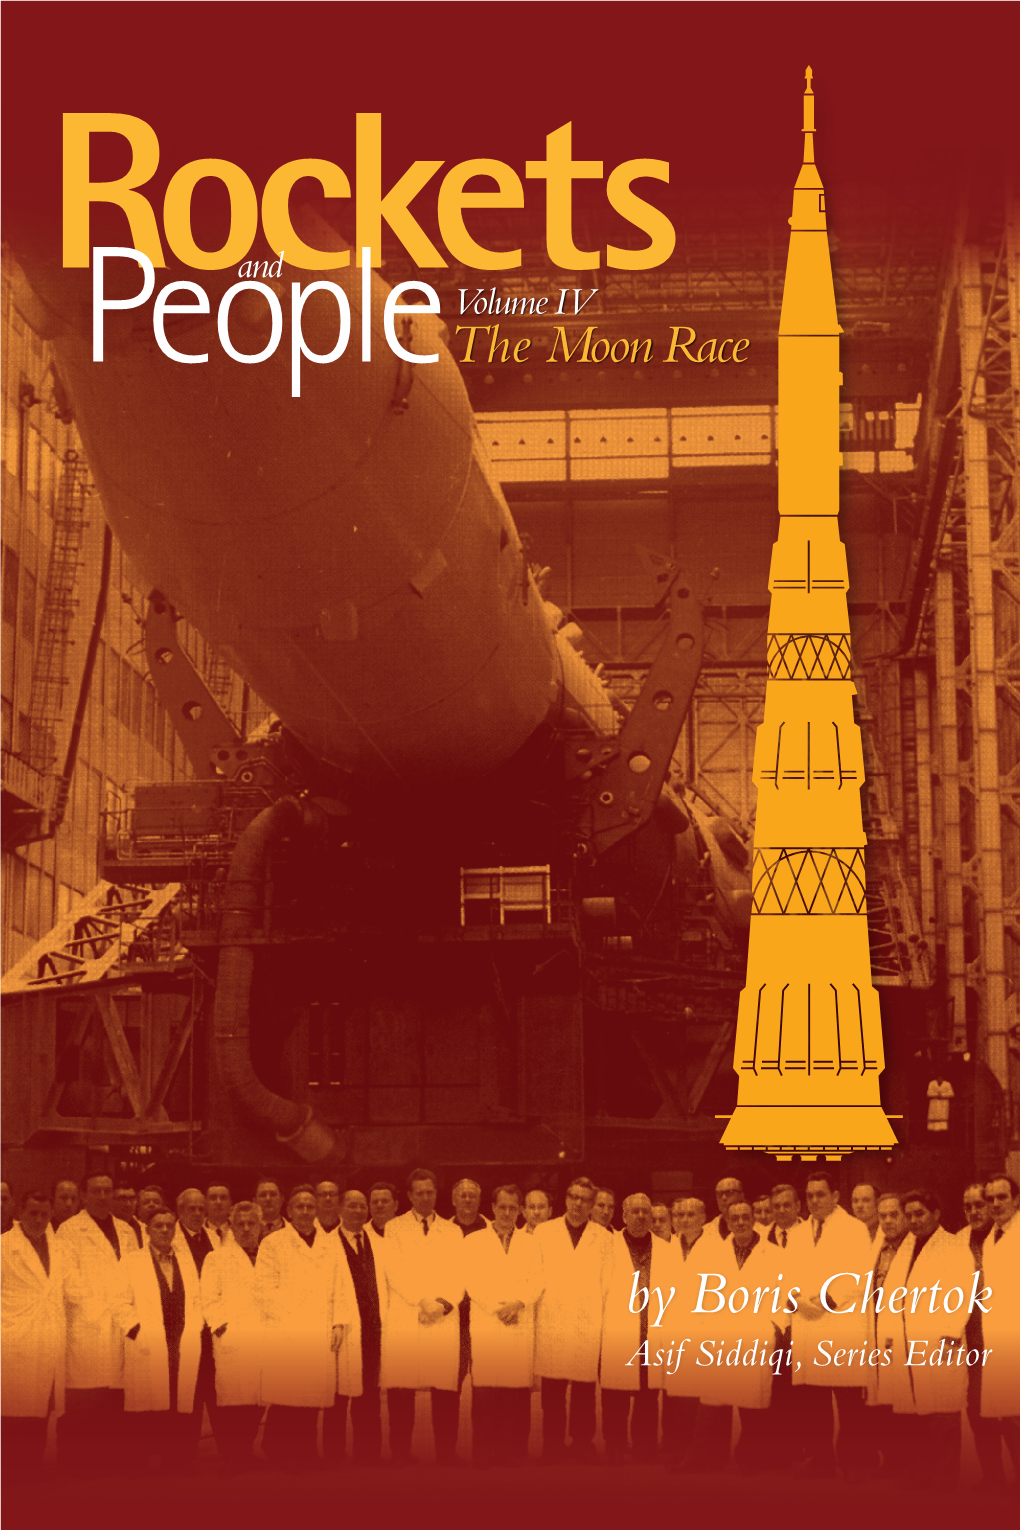 Rockets and People: the Moon Race (Volume IV) / by Boris E